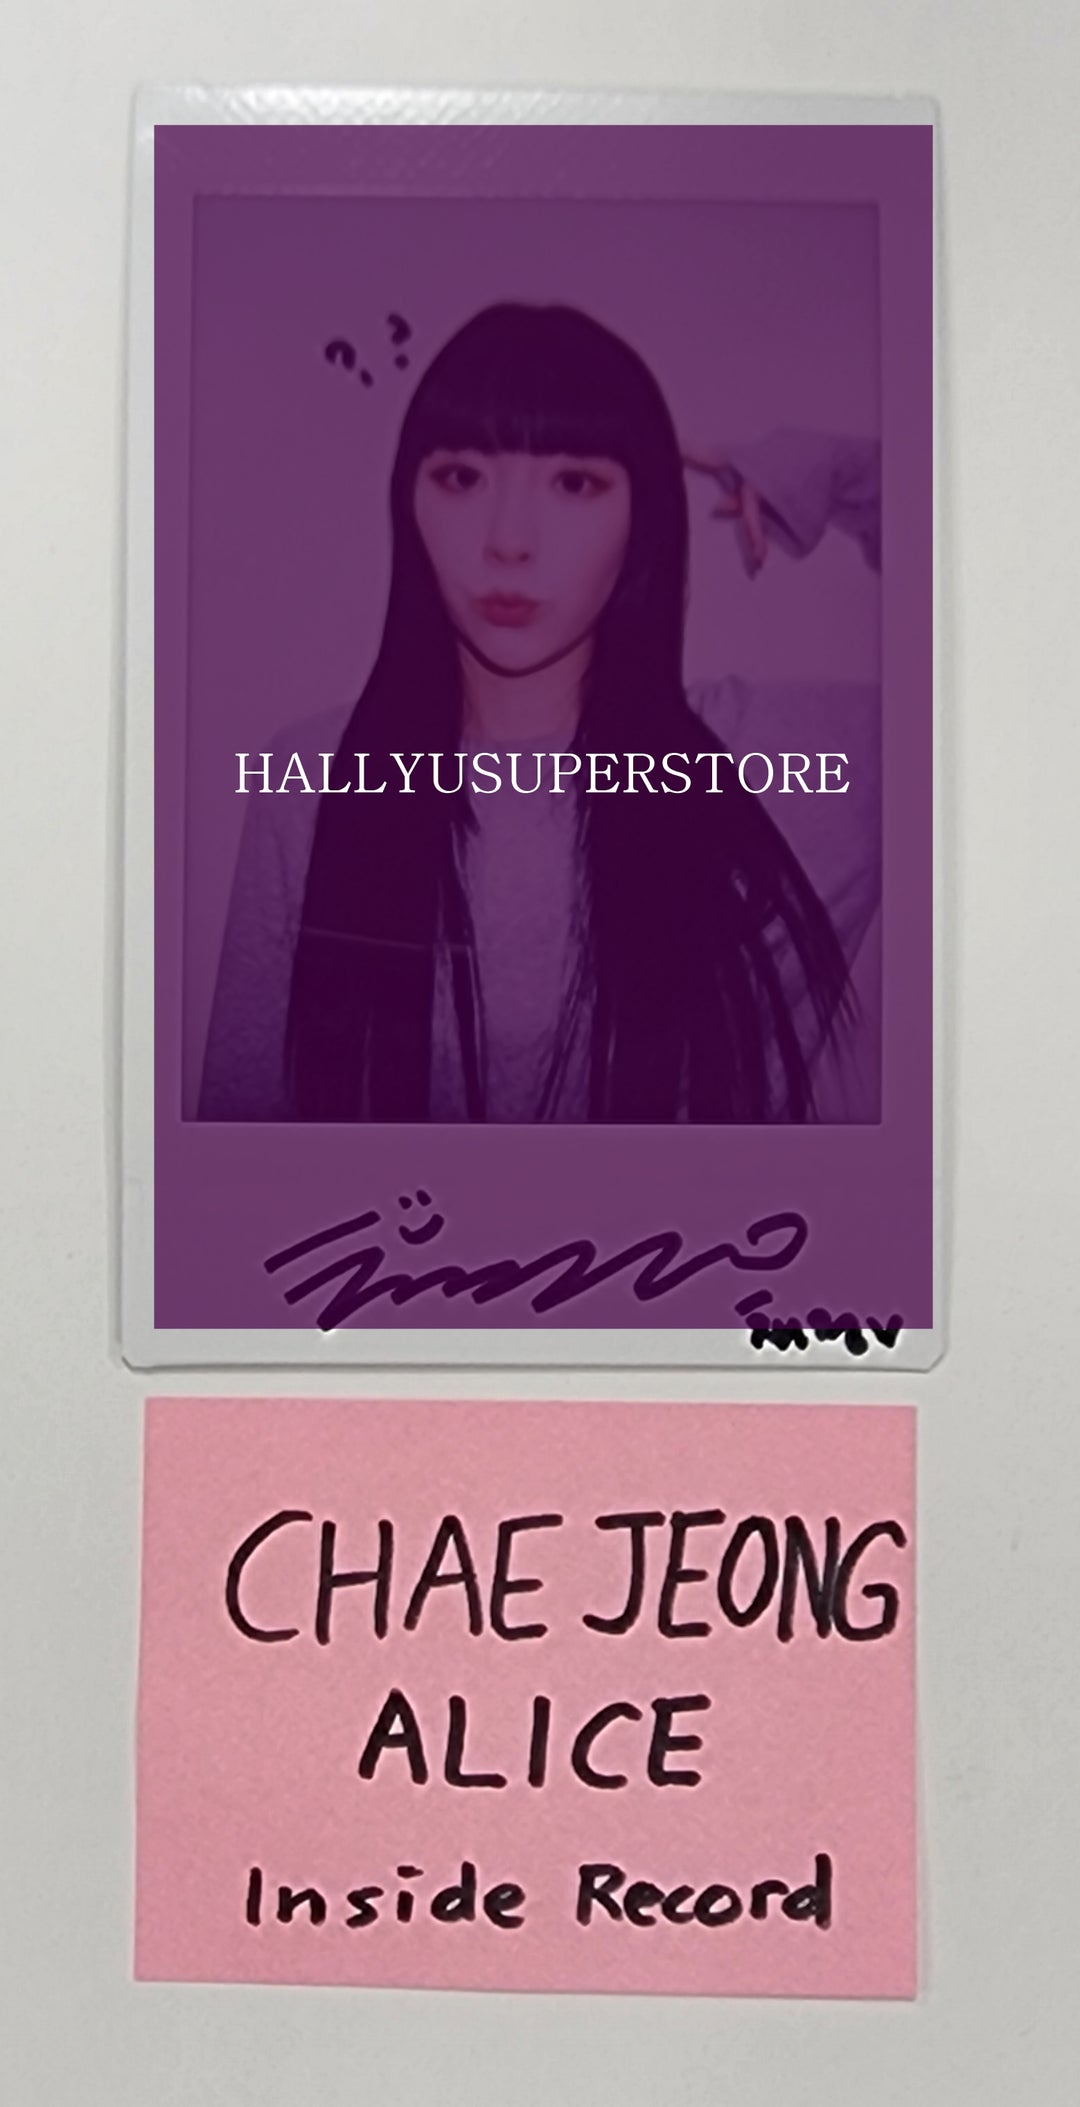 Chae Jeong (Of Alice) "SHOW DOWN" - Hand Autographed(Signed) Polaroid